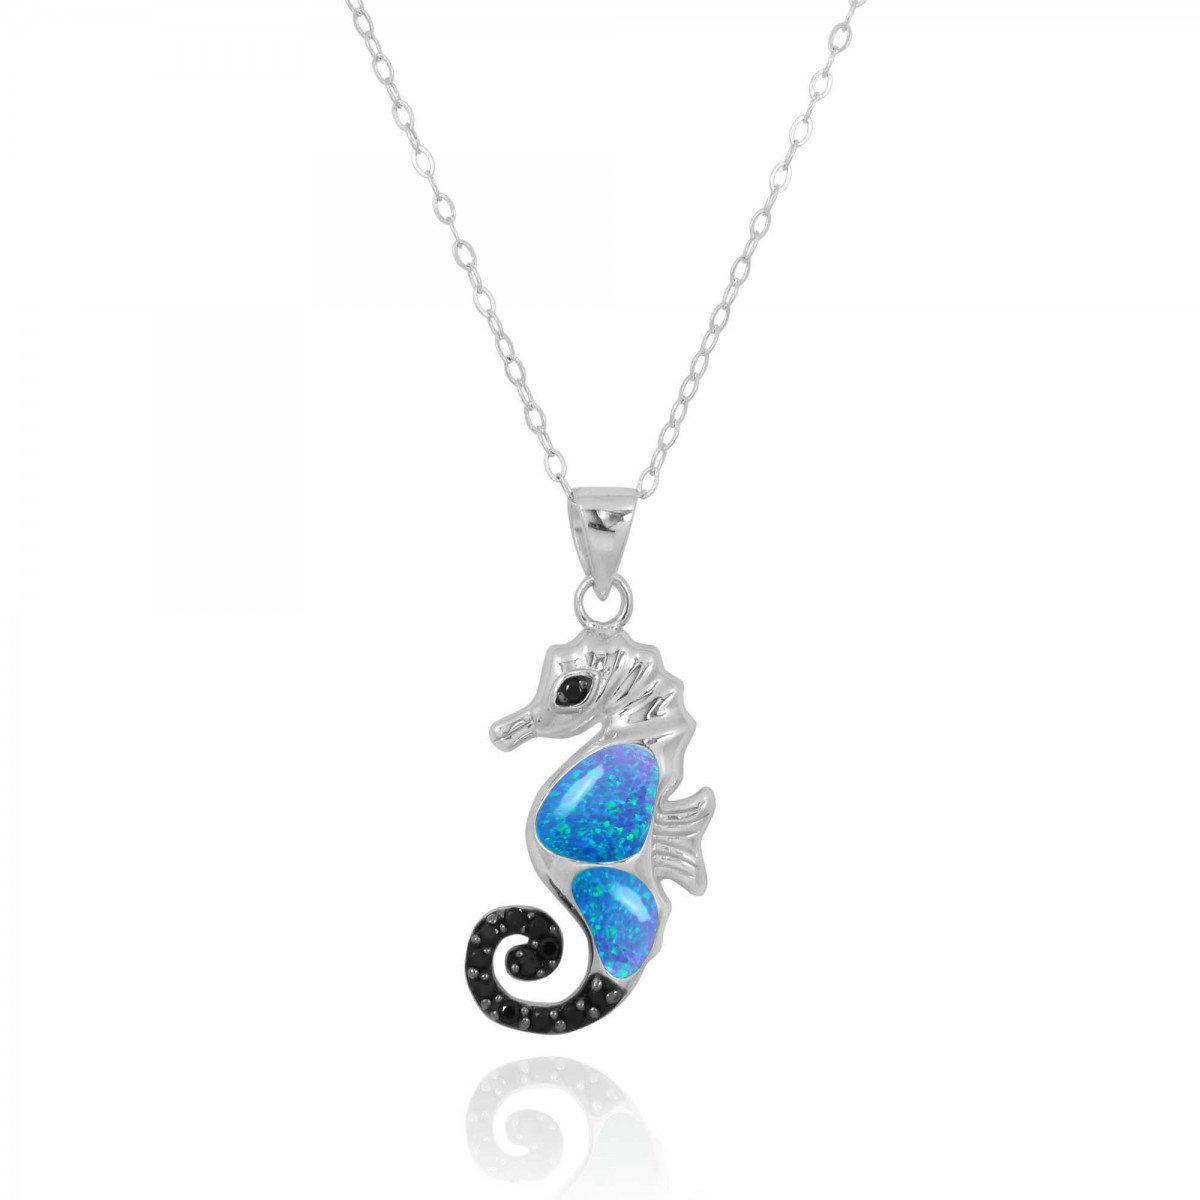 Seahorse Pendant Necklace with Blue Opal and Black Spinel